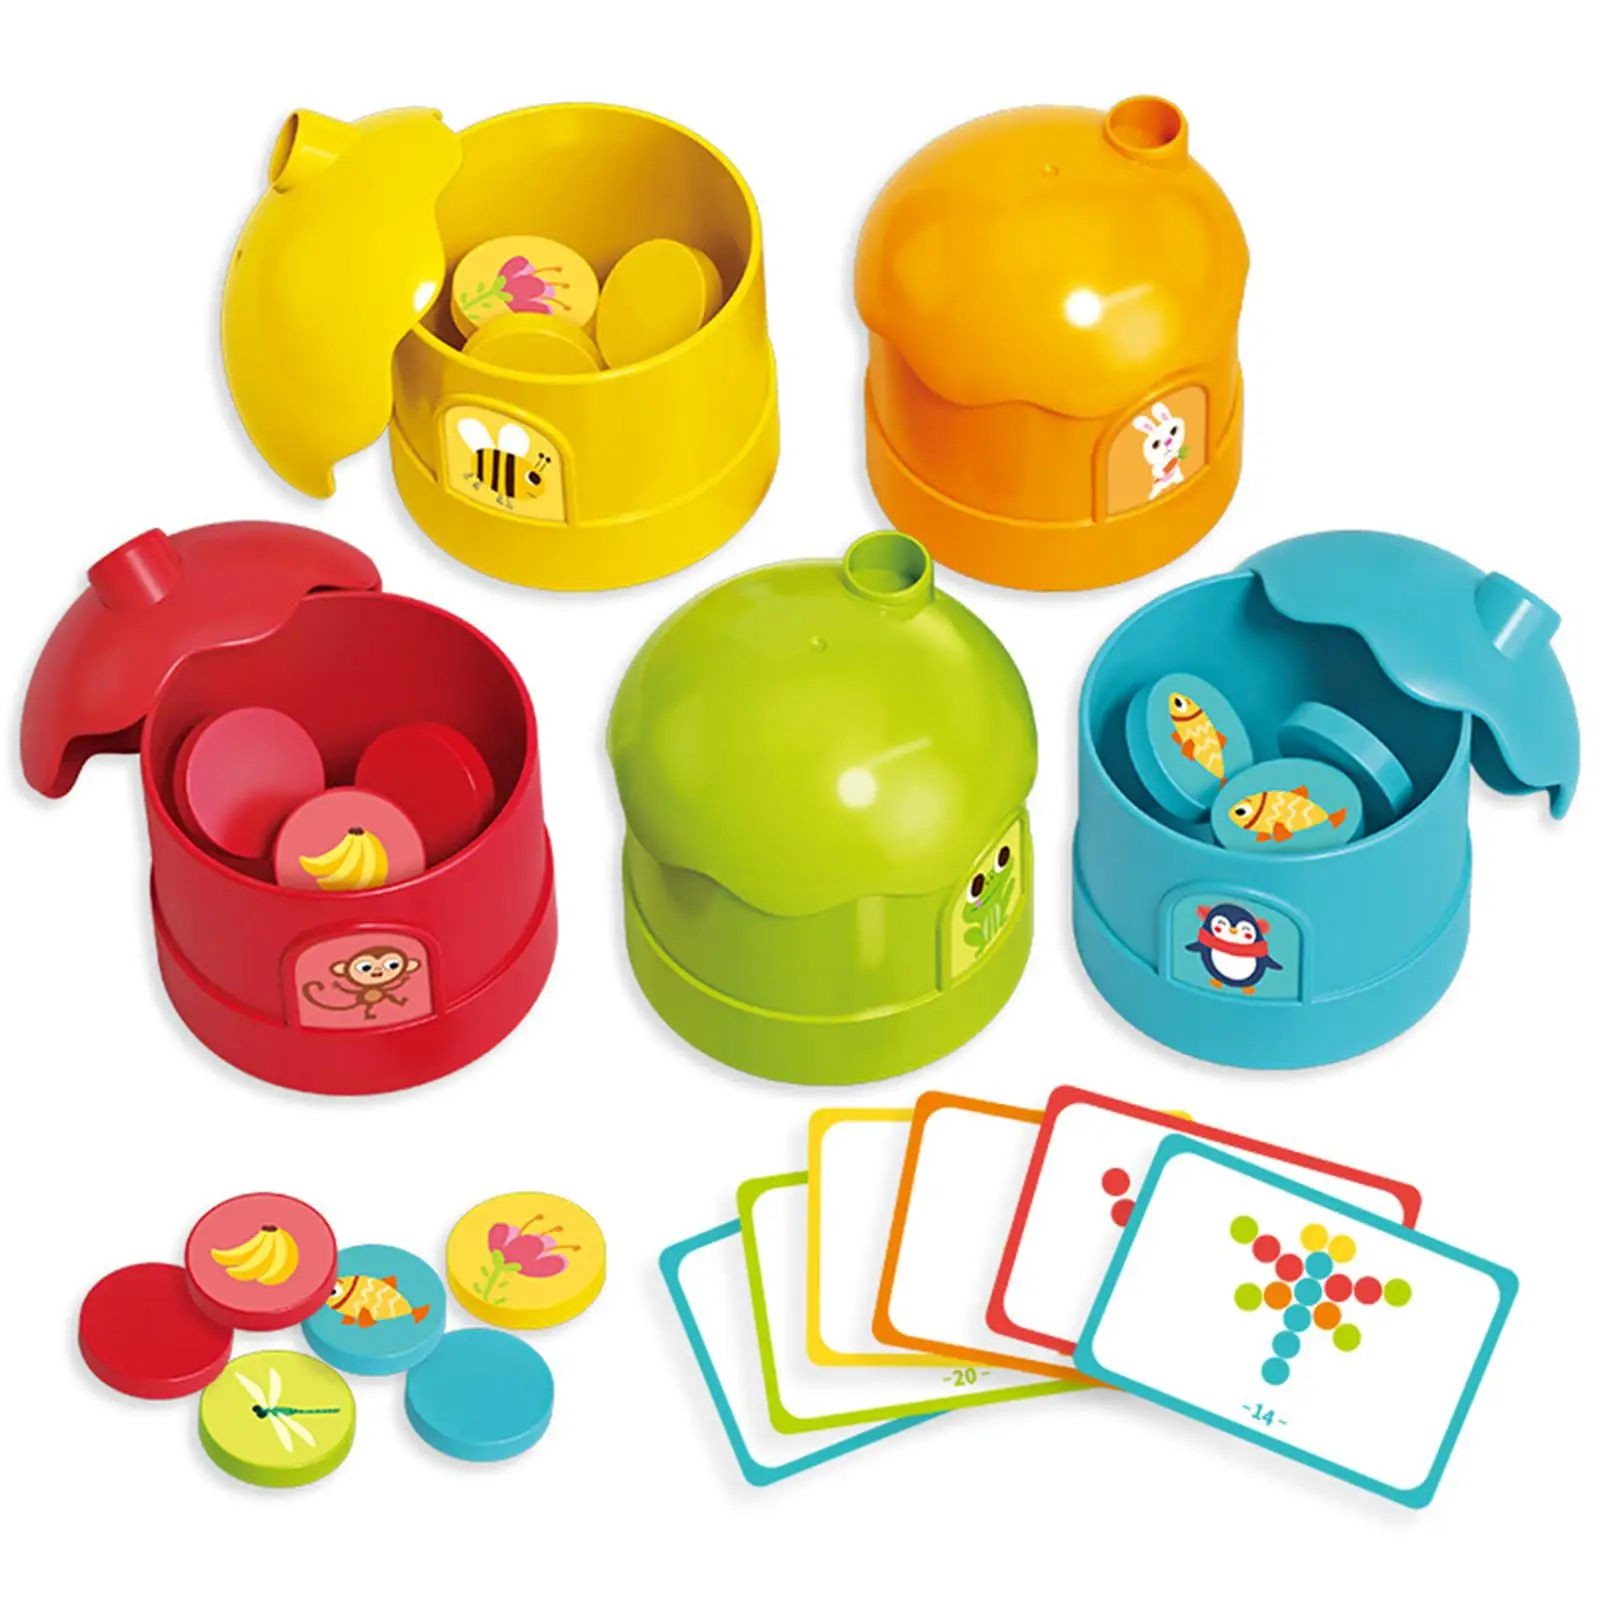 Sorting Cup Multipurpose Cognition Practical for Family Holiday Girls Boys